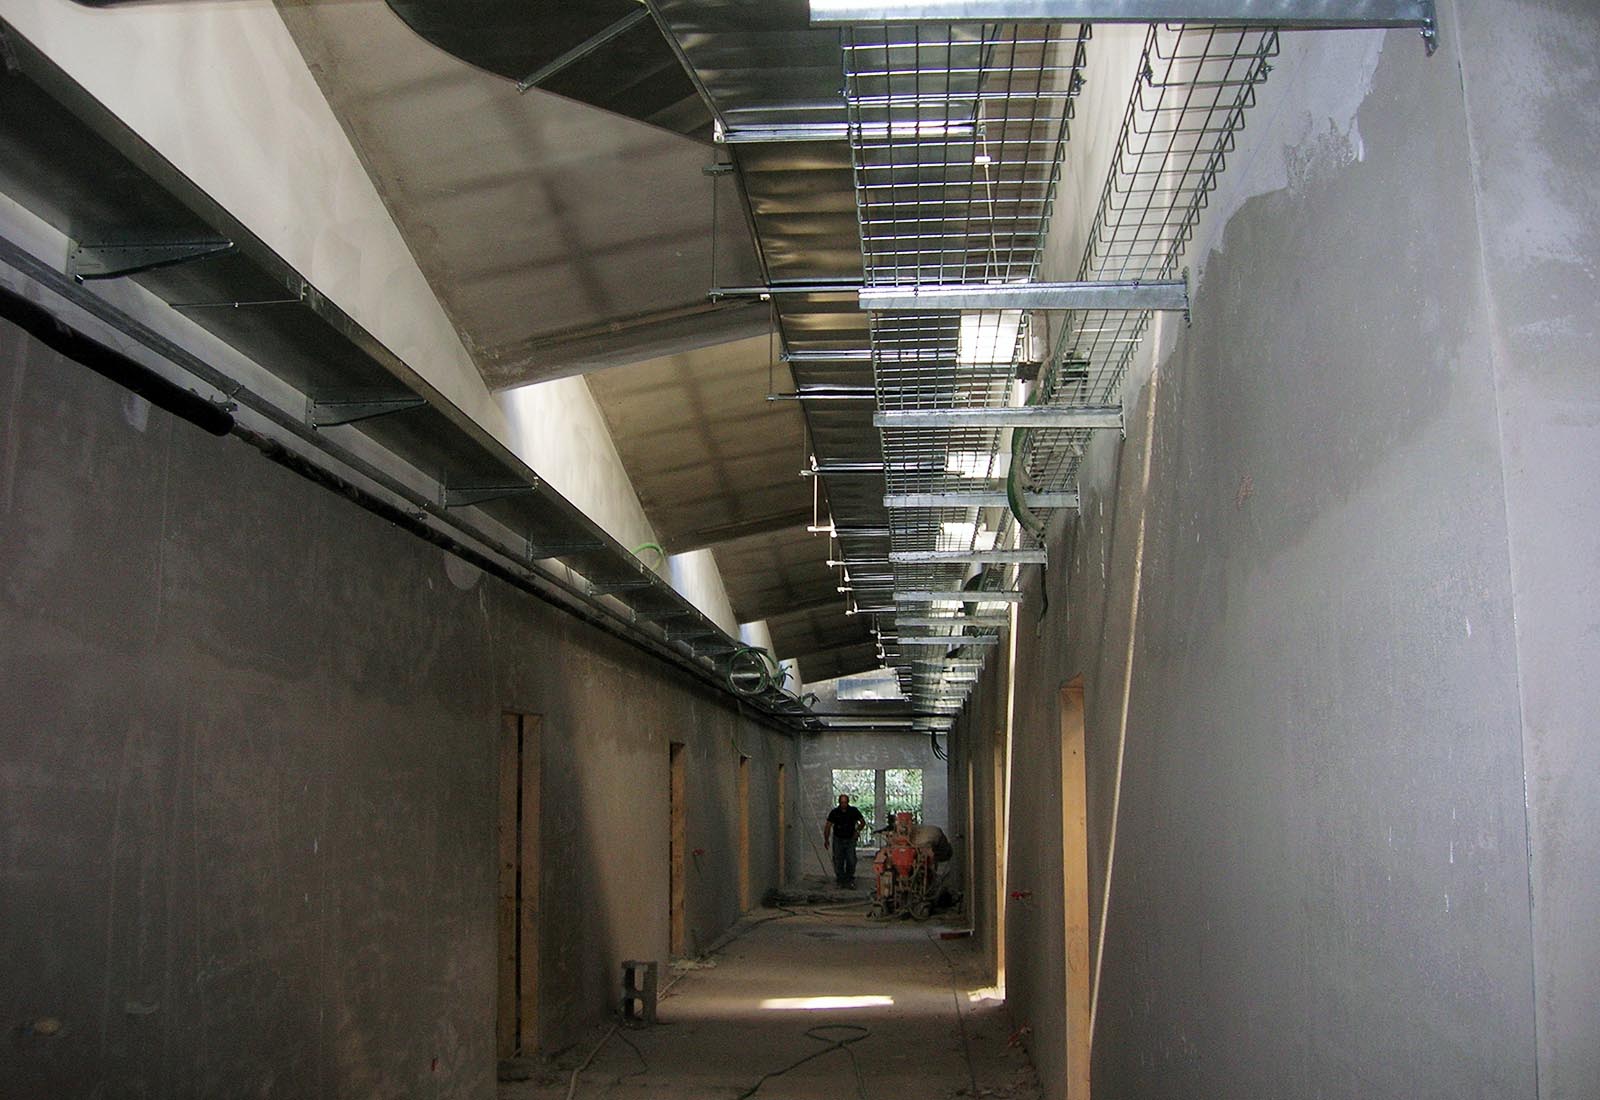 Manzoni school center in Milan - Air conditioning system